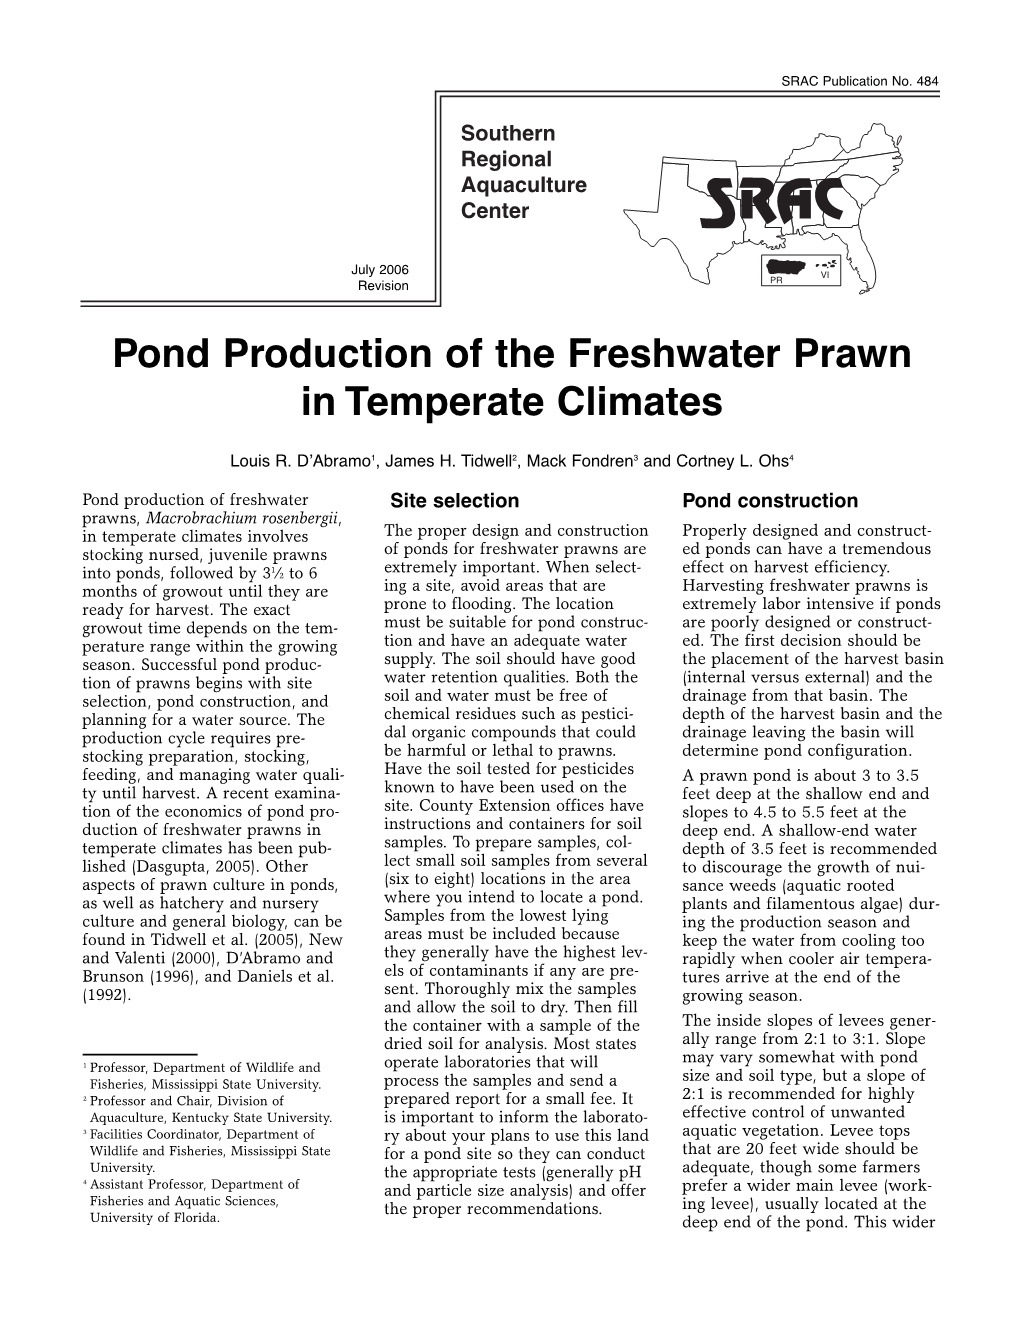 Pond Production of the Freshwater Prawn in Temperate Climates